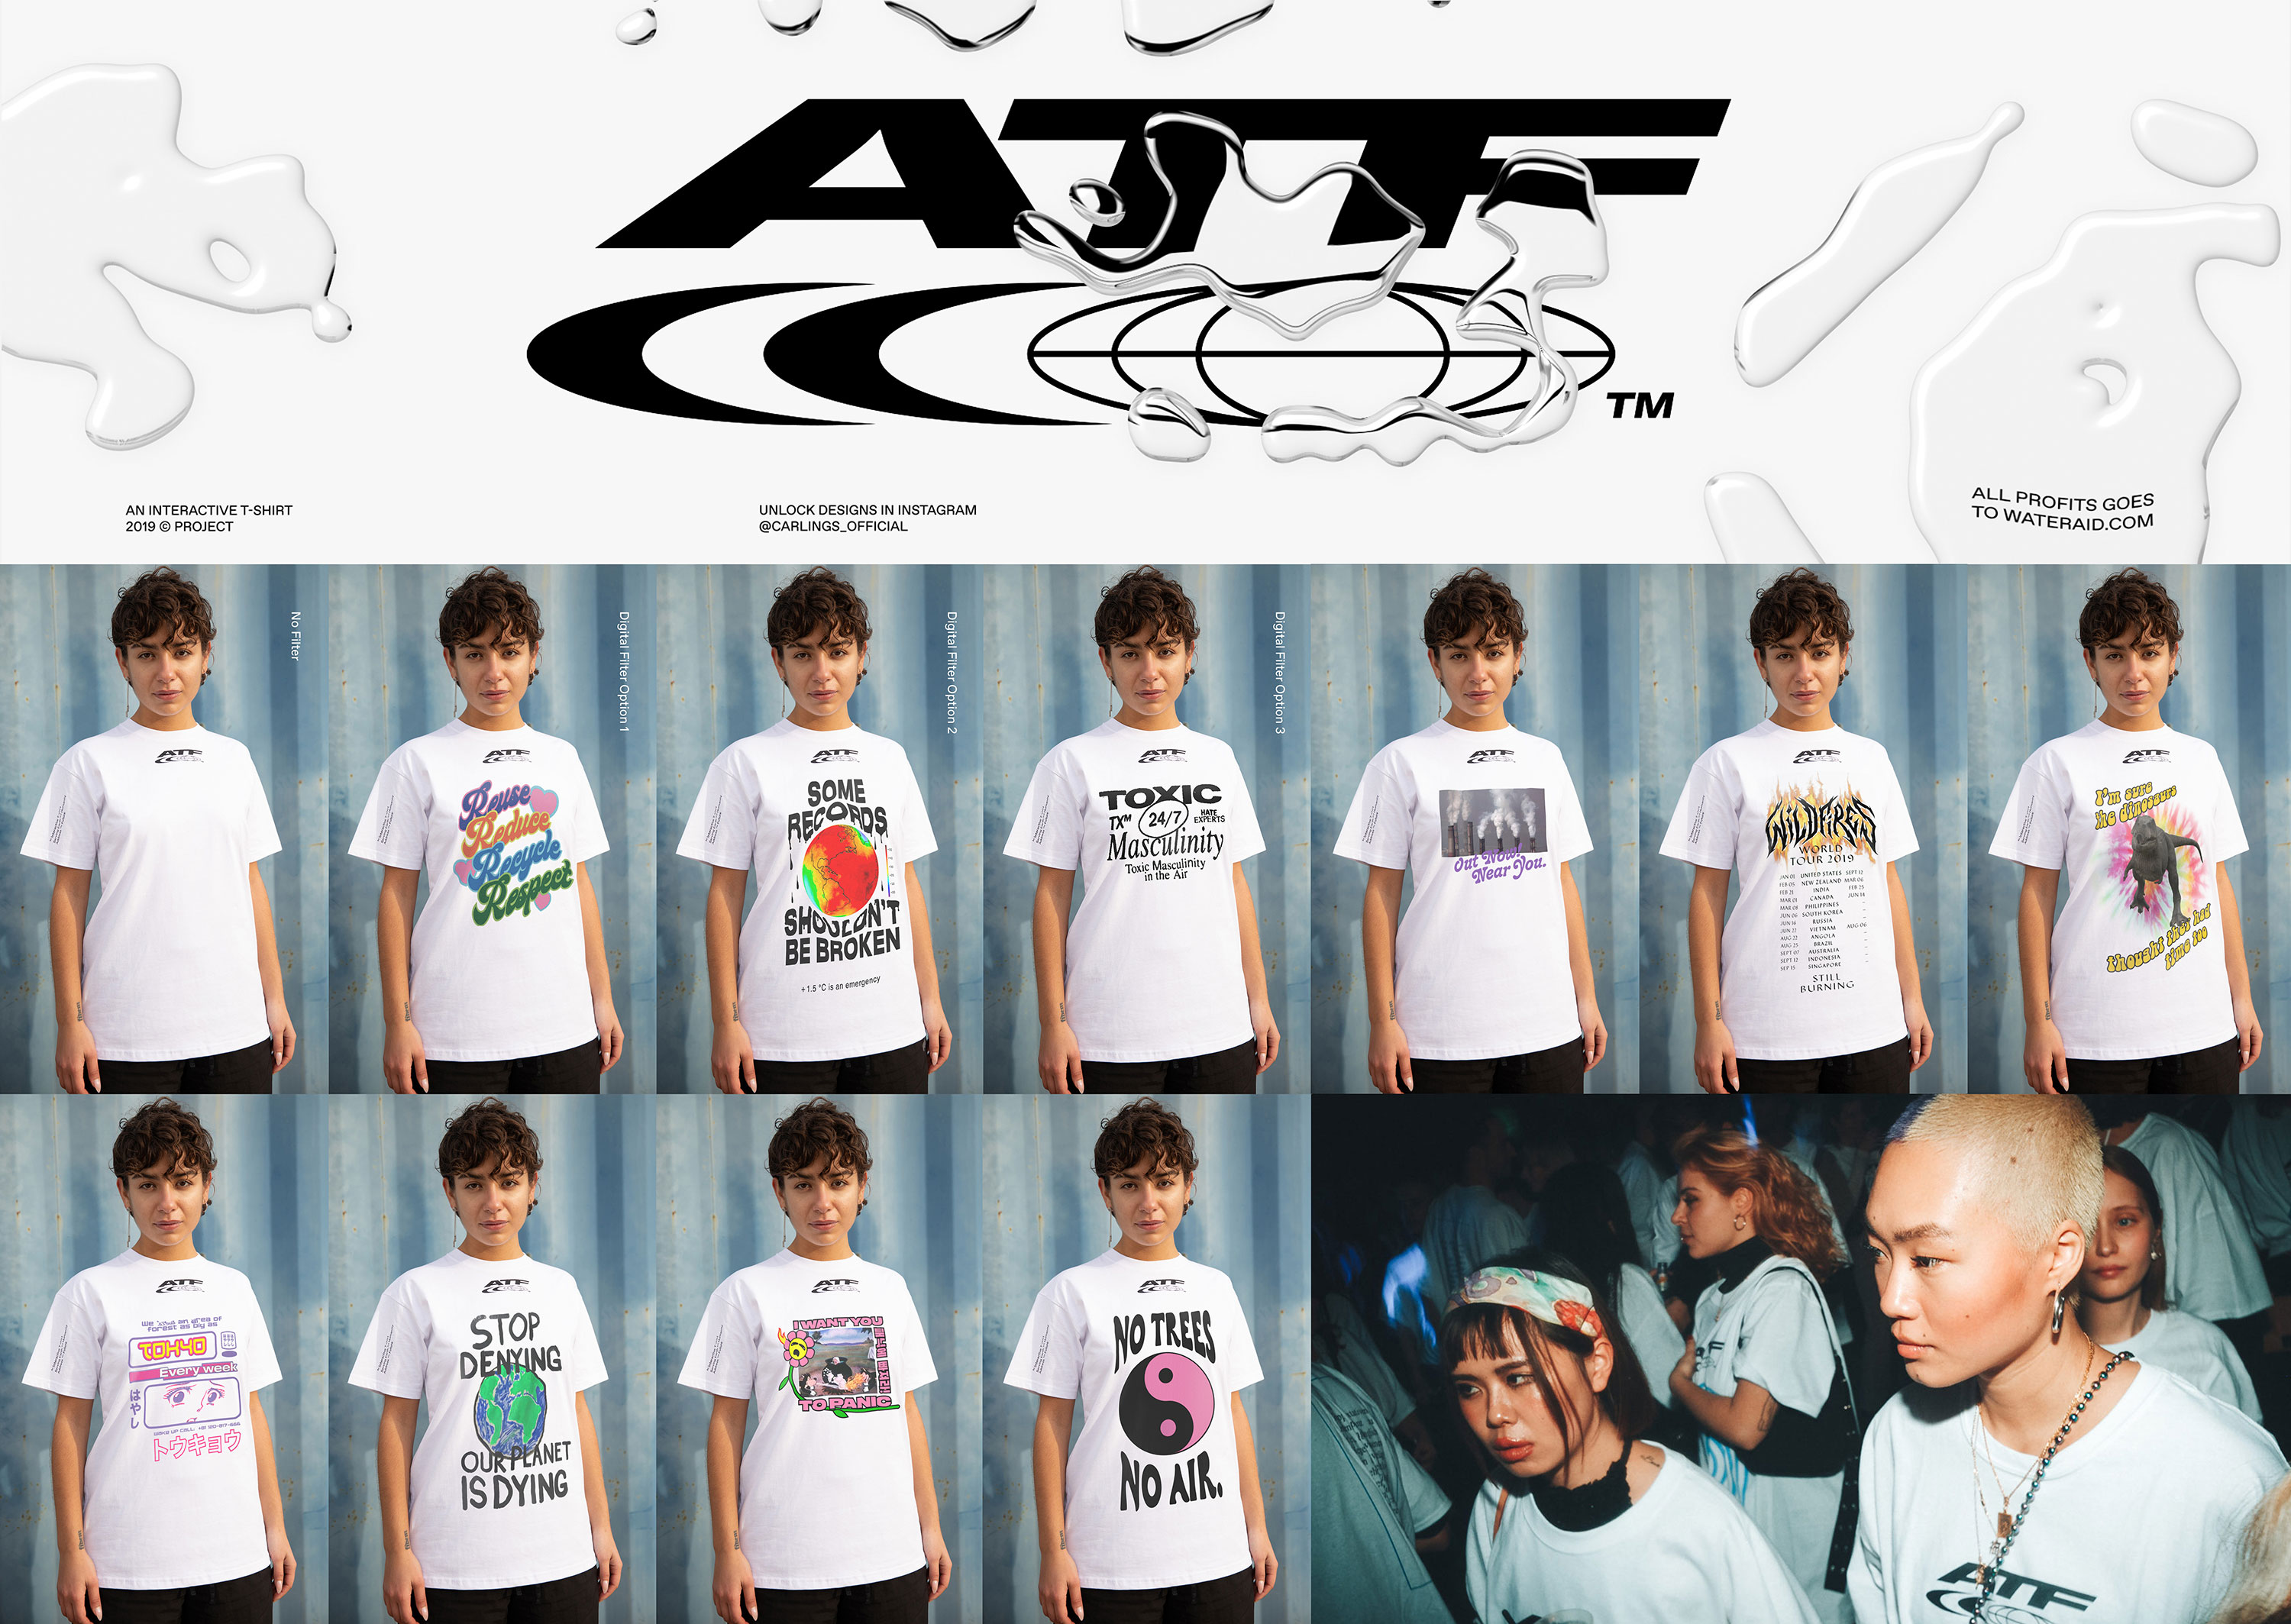 Examples of AR emposed design on the t-shirt